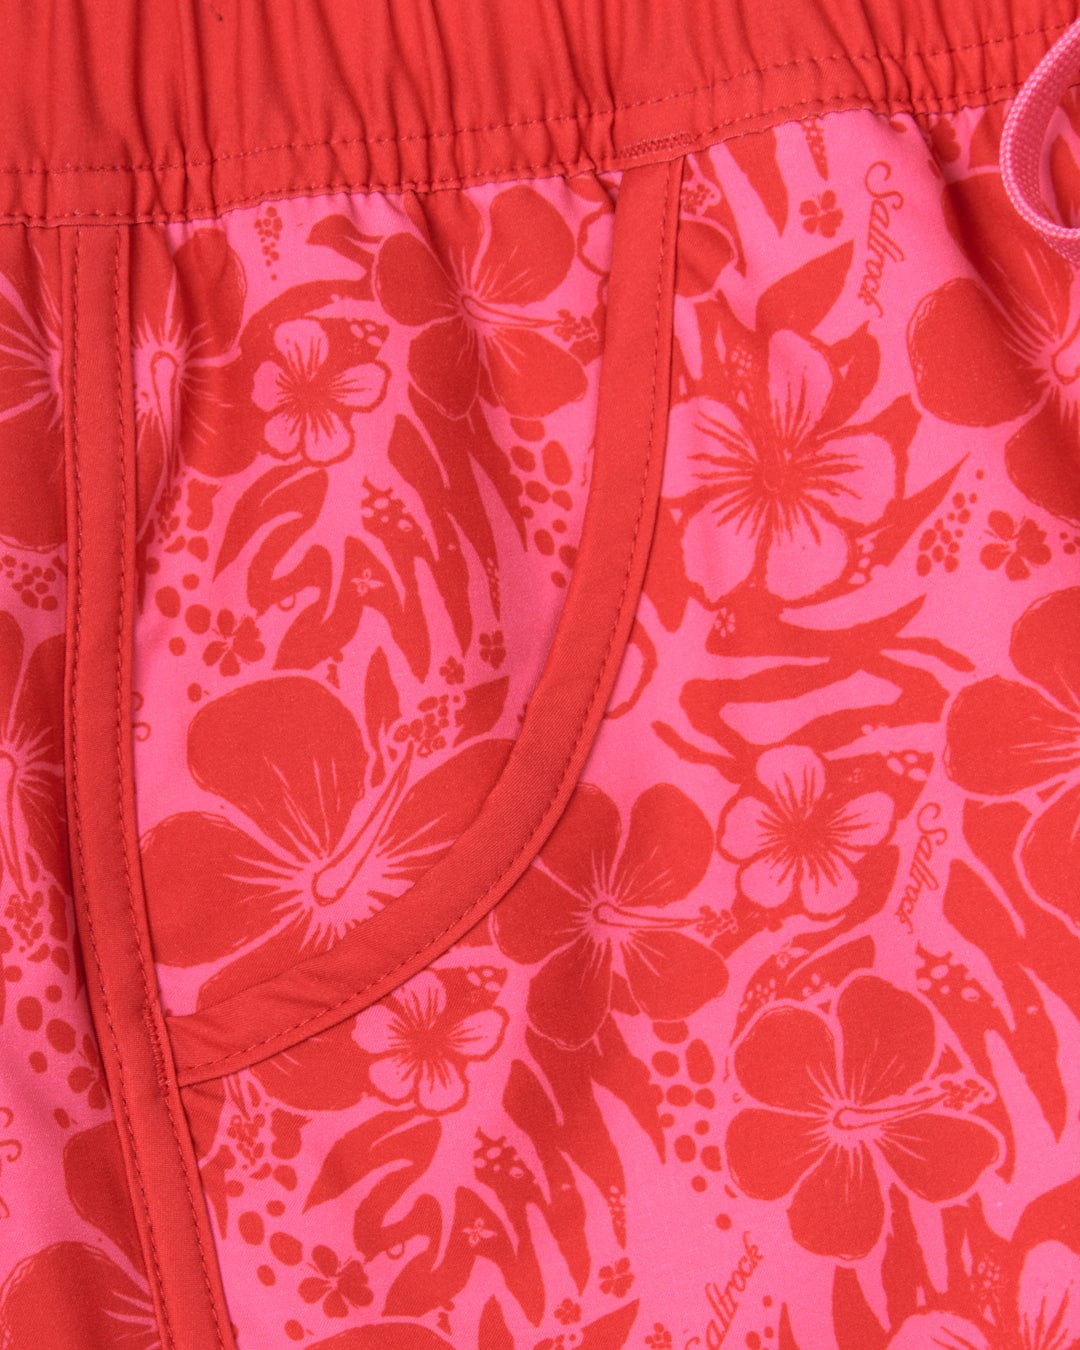 Girl's swim trunks with a floral print in Repreve recycled material - Hibiscus Women's Boardshorts by Saltrock.